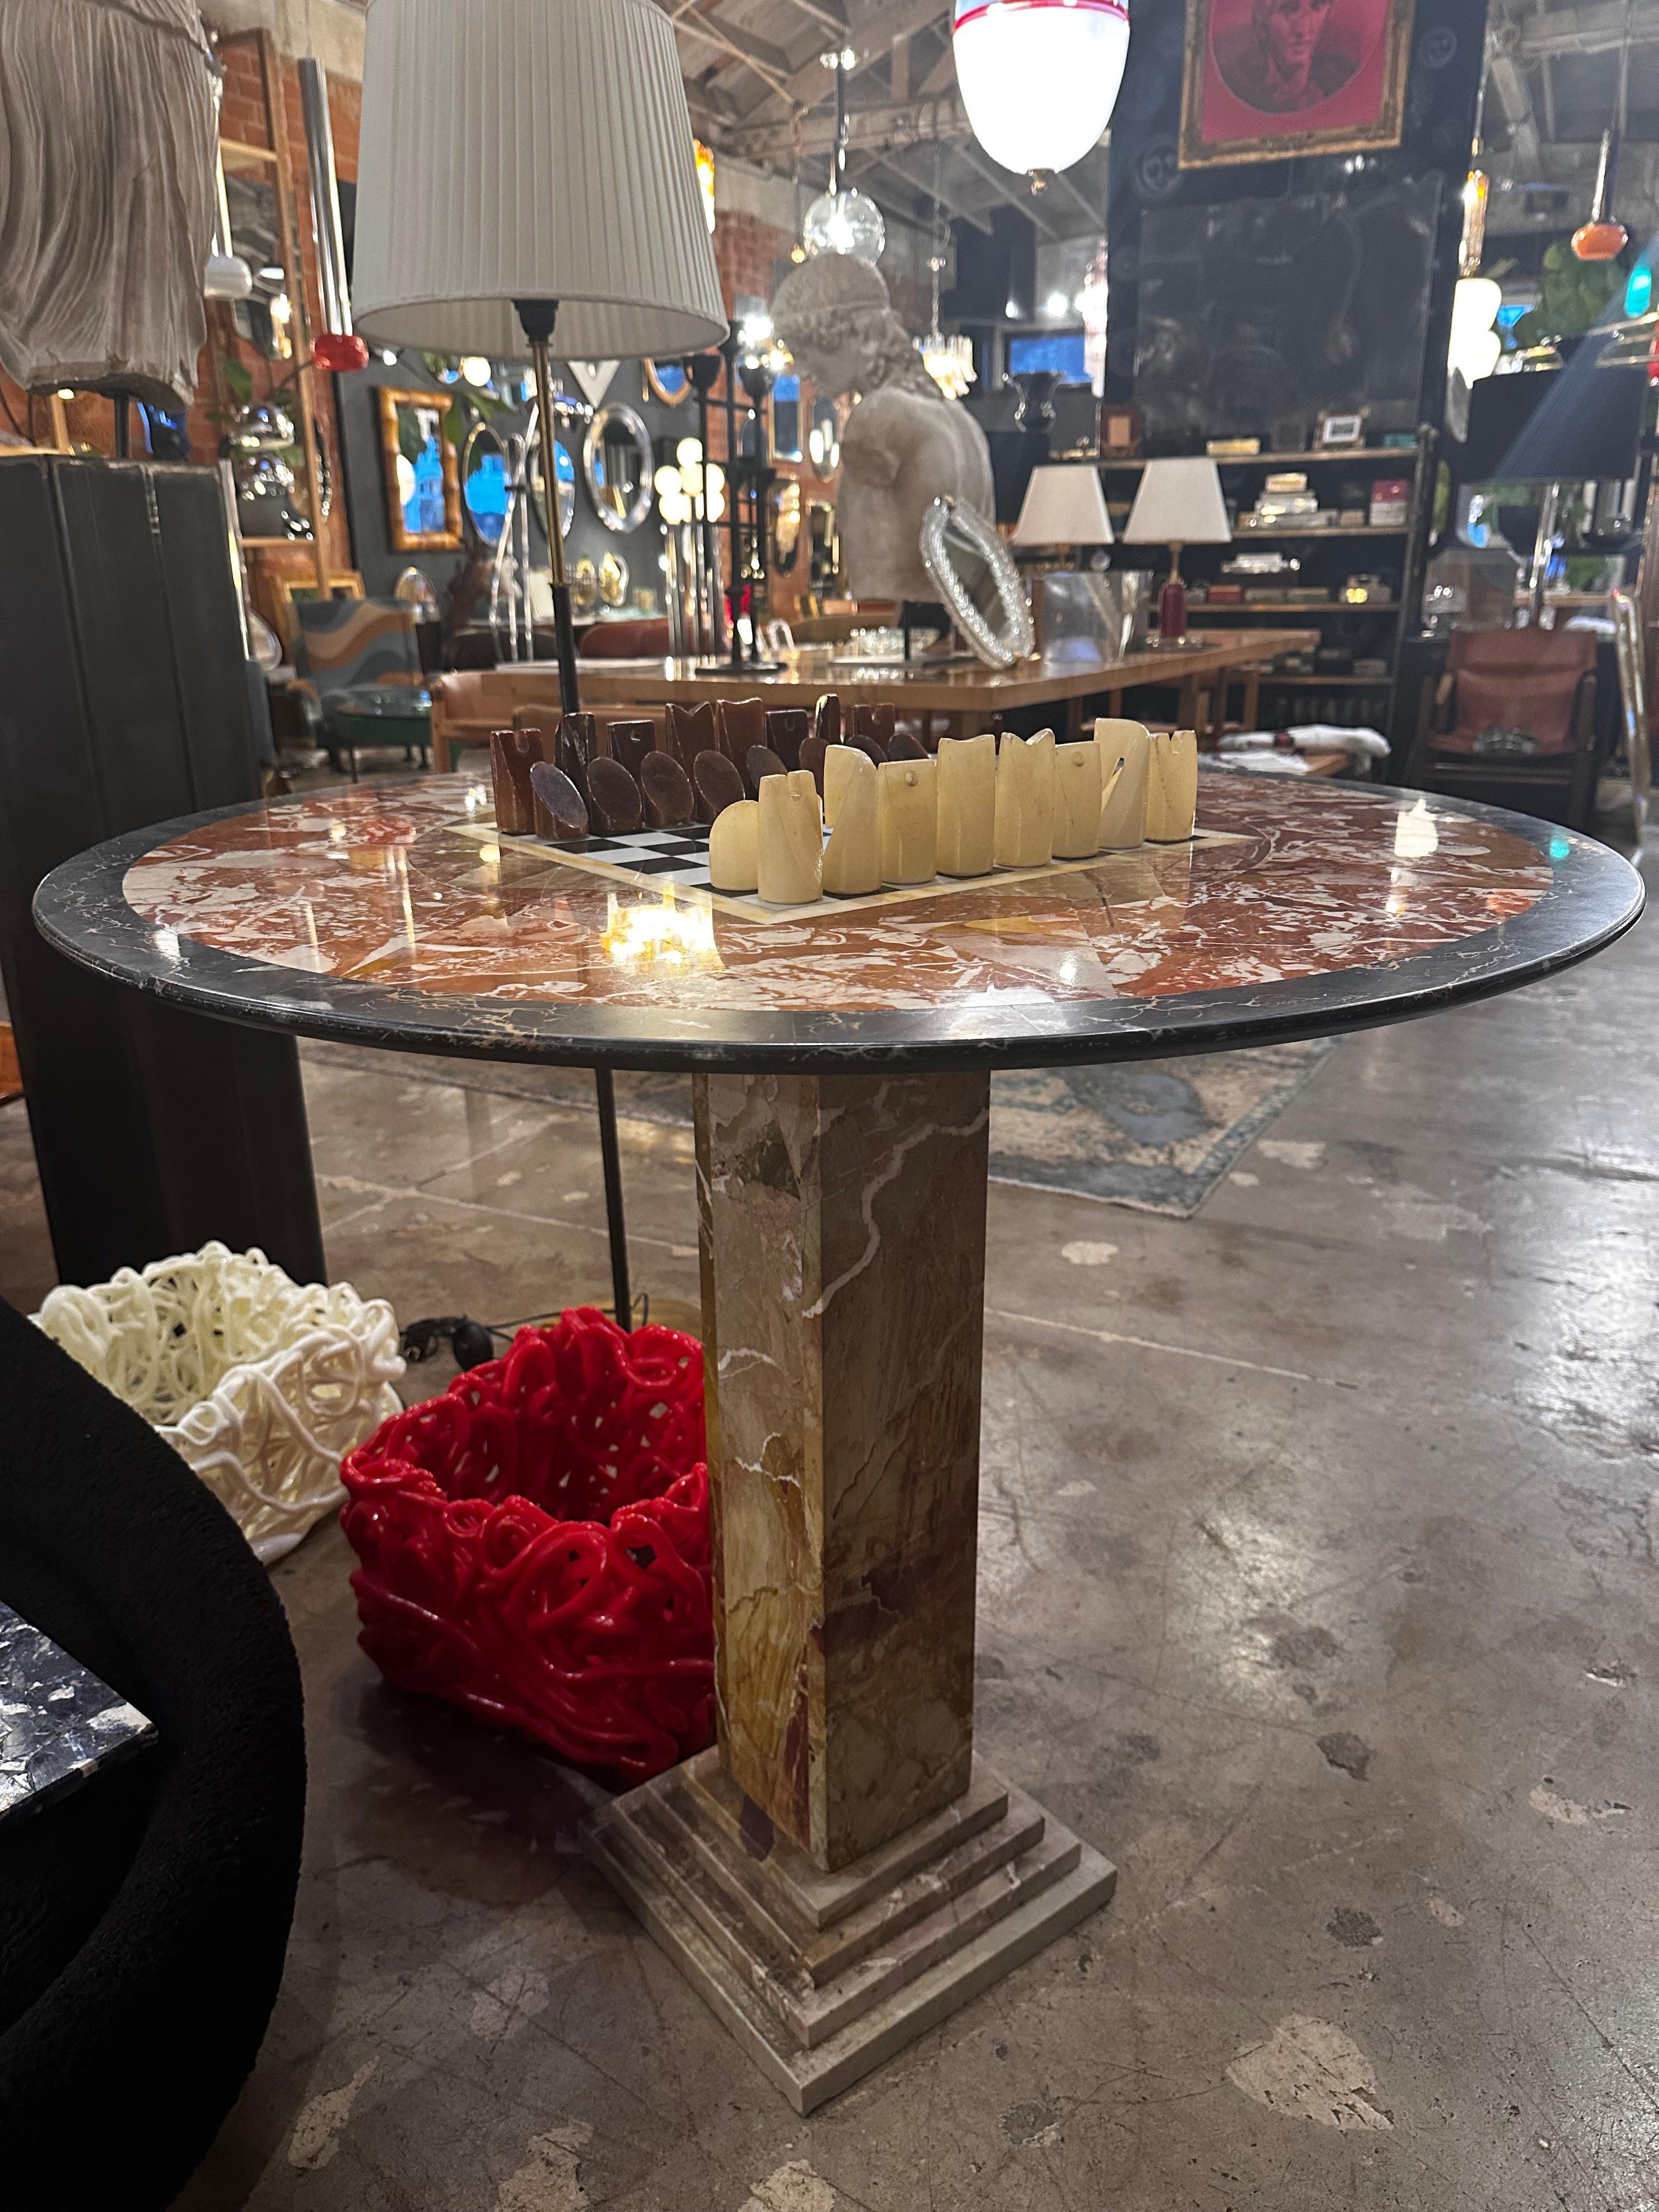 The Extraordinary Mid-Century Italian Green Marble Chess Table from the 1950s is a true work of art. Crafted from luxurious green marble, the table is a statement piece in itself. What sets it apart are the hand-carved marble chess pieces, adding an